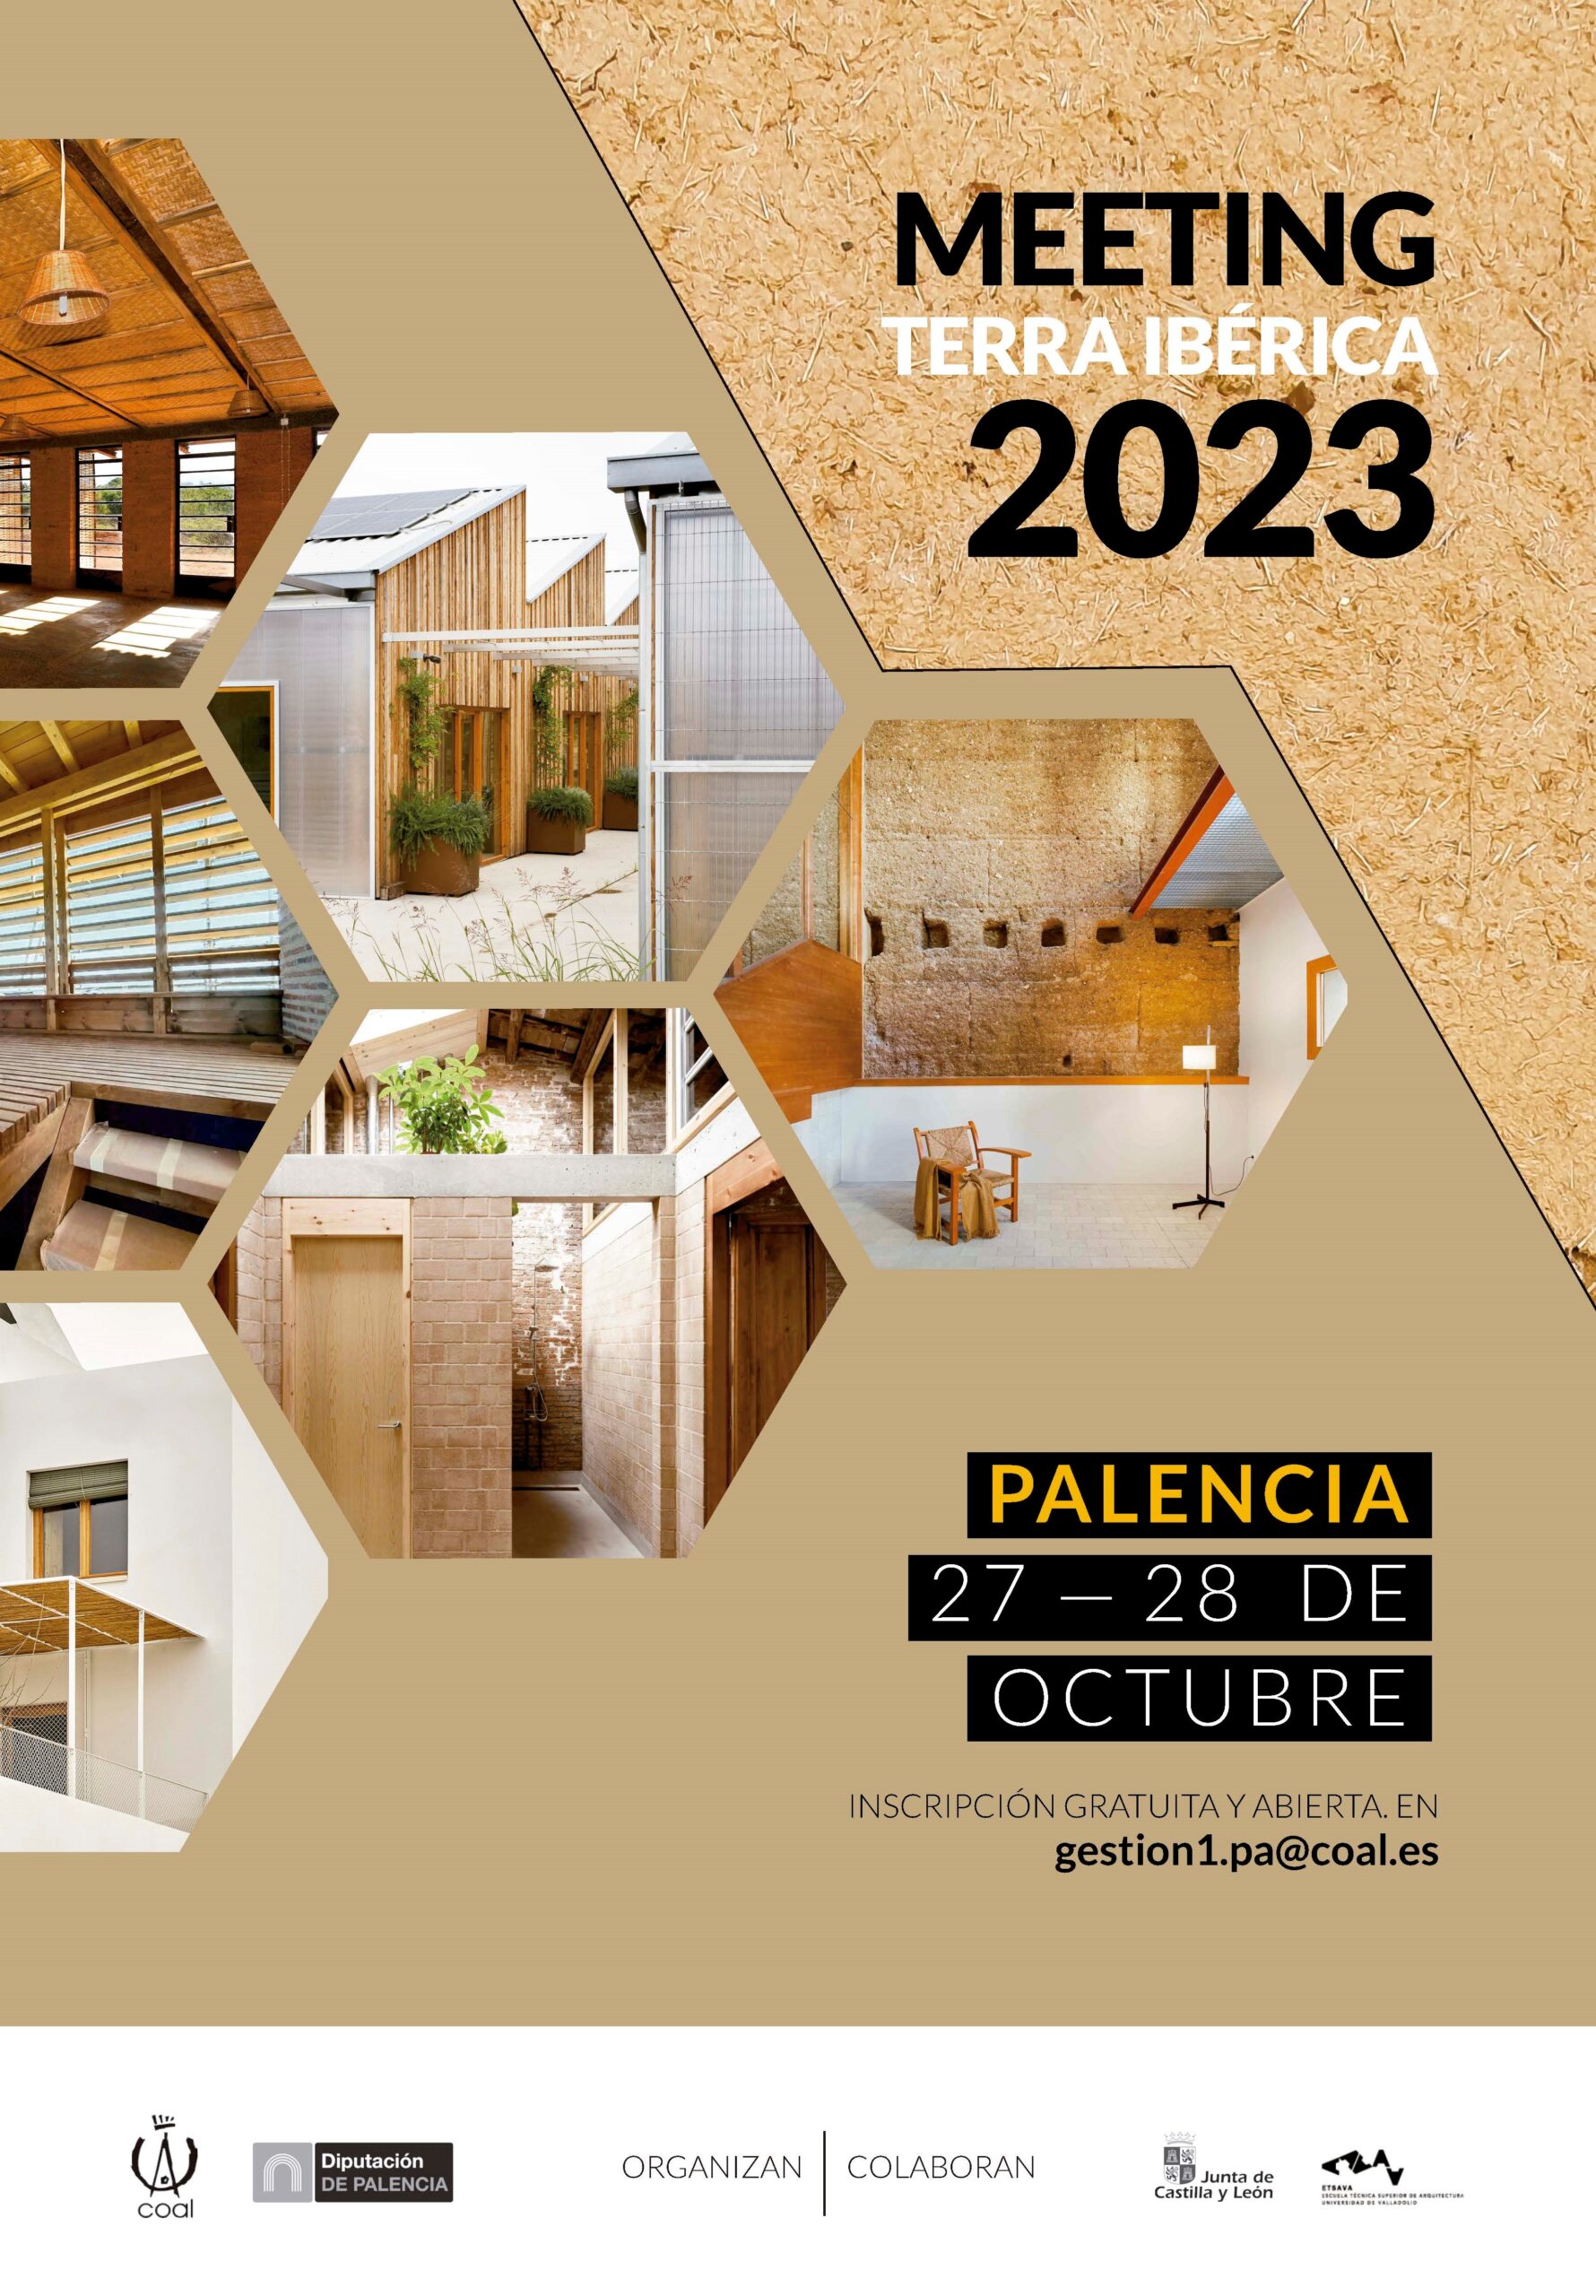 TERRA IBÉRICA meeting 2023 spain competition award earth architecture tierra tapial arquitectura